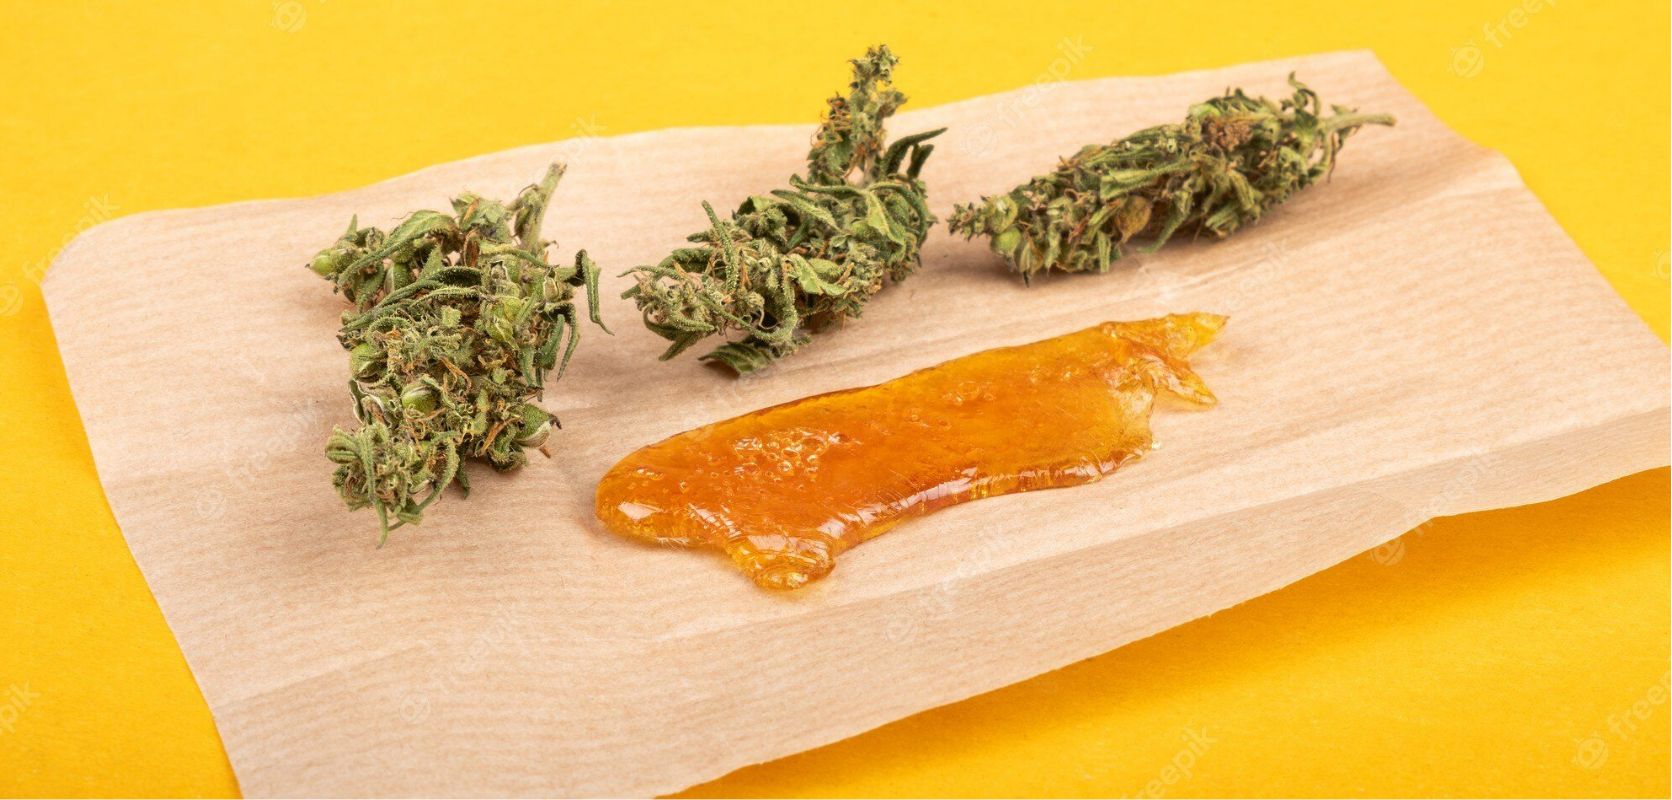 Now that you are more aware of what cannabis concentrates are, you may be wondering "what is THC wax?". T